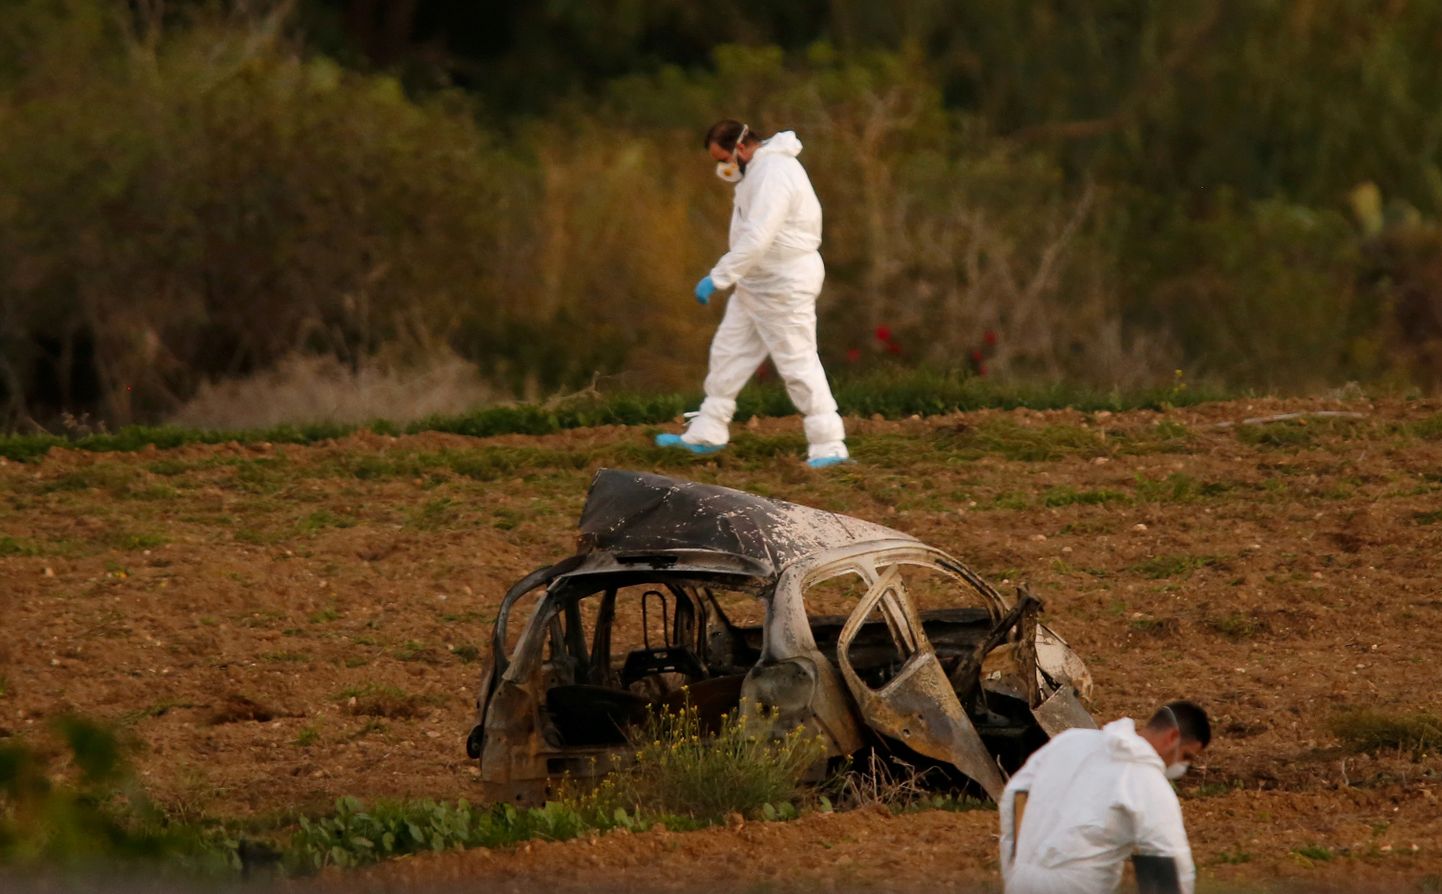 FILE PHOTO: Forensic experts walk in a field after a powerful bomb blew up a car (Foreground) and killed investigative journalist Daphne Caruana Galizia in Bidnija, Malta, October 16, 2017.   To match Special Report MALTA-DAPHNE/CHINA. REUTERS/Darrin Zammit Lupi/File Photo